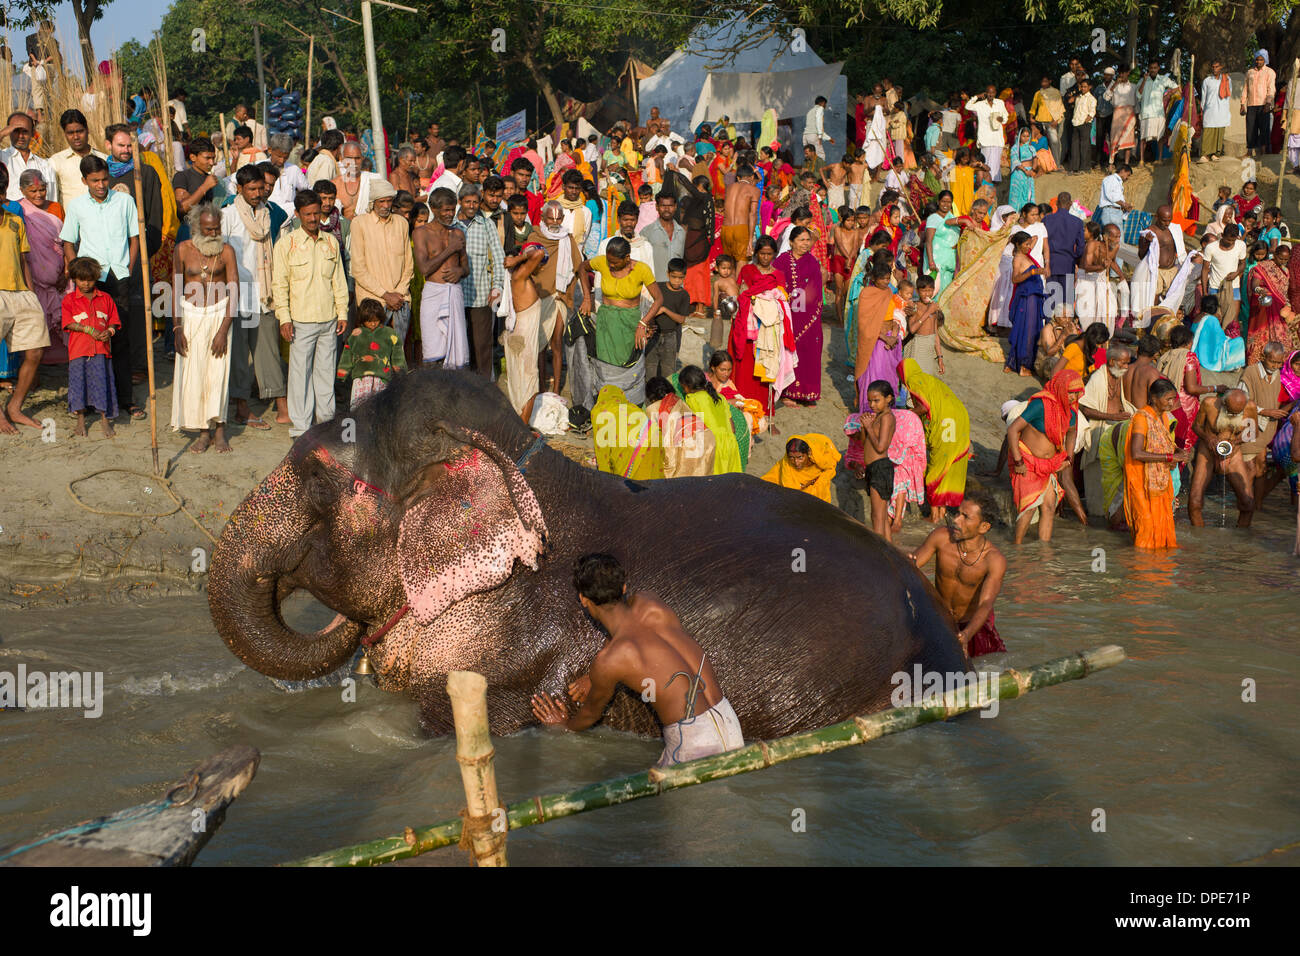 Mahouts bathing an elephant in the River Gandak, with pilgrims watching from the bank, Sonepur Mela, Sonepur, Bihar, India Stock Photo